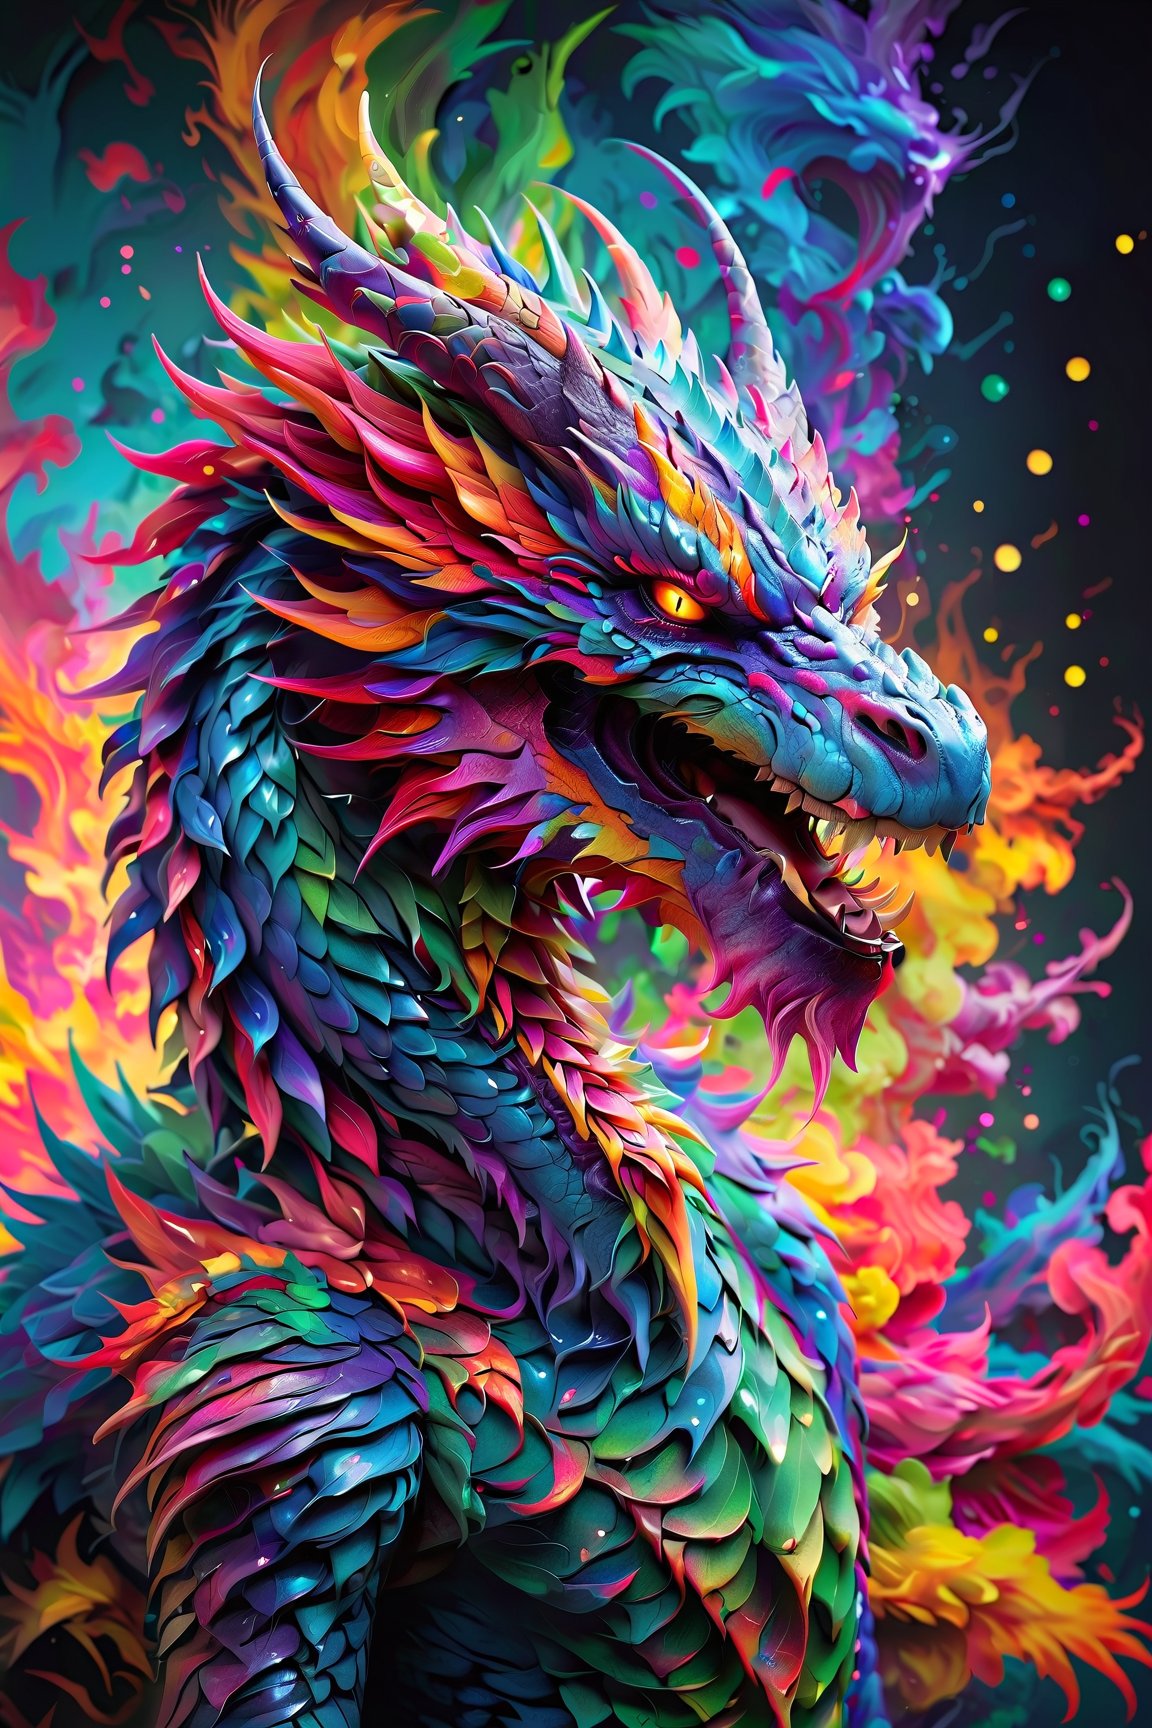 AiArtV, Dragon, (best quality, 8K, highres, masterpiece), ultra-detailed, (photorealistic, cinematic), illustration painting of a luminous and enchanting bad guy undead/human-like creature with vibrant and dynamic anime-style colors. The creature, with dark, colorful hair, strikes a dynamic pose in a brilliantly lit fantasy realm environment filled with a kaleidoscope of colors. The mid-shot composition and rule of thirds depth of field emphasize intricate details, creating a fantastical realm that bursts with subtle and vibrant colors. The use of light particles enhances the scene's grandeur and awe, making it a stunning visual masterpiece in a double-exposure style. The strong outlines contribute to the scene's cinematic feel, creating a super colorful and visually captivating narrative
,Dragonyear 